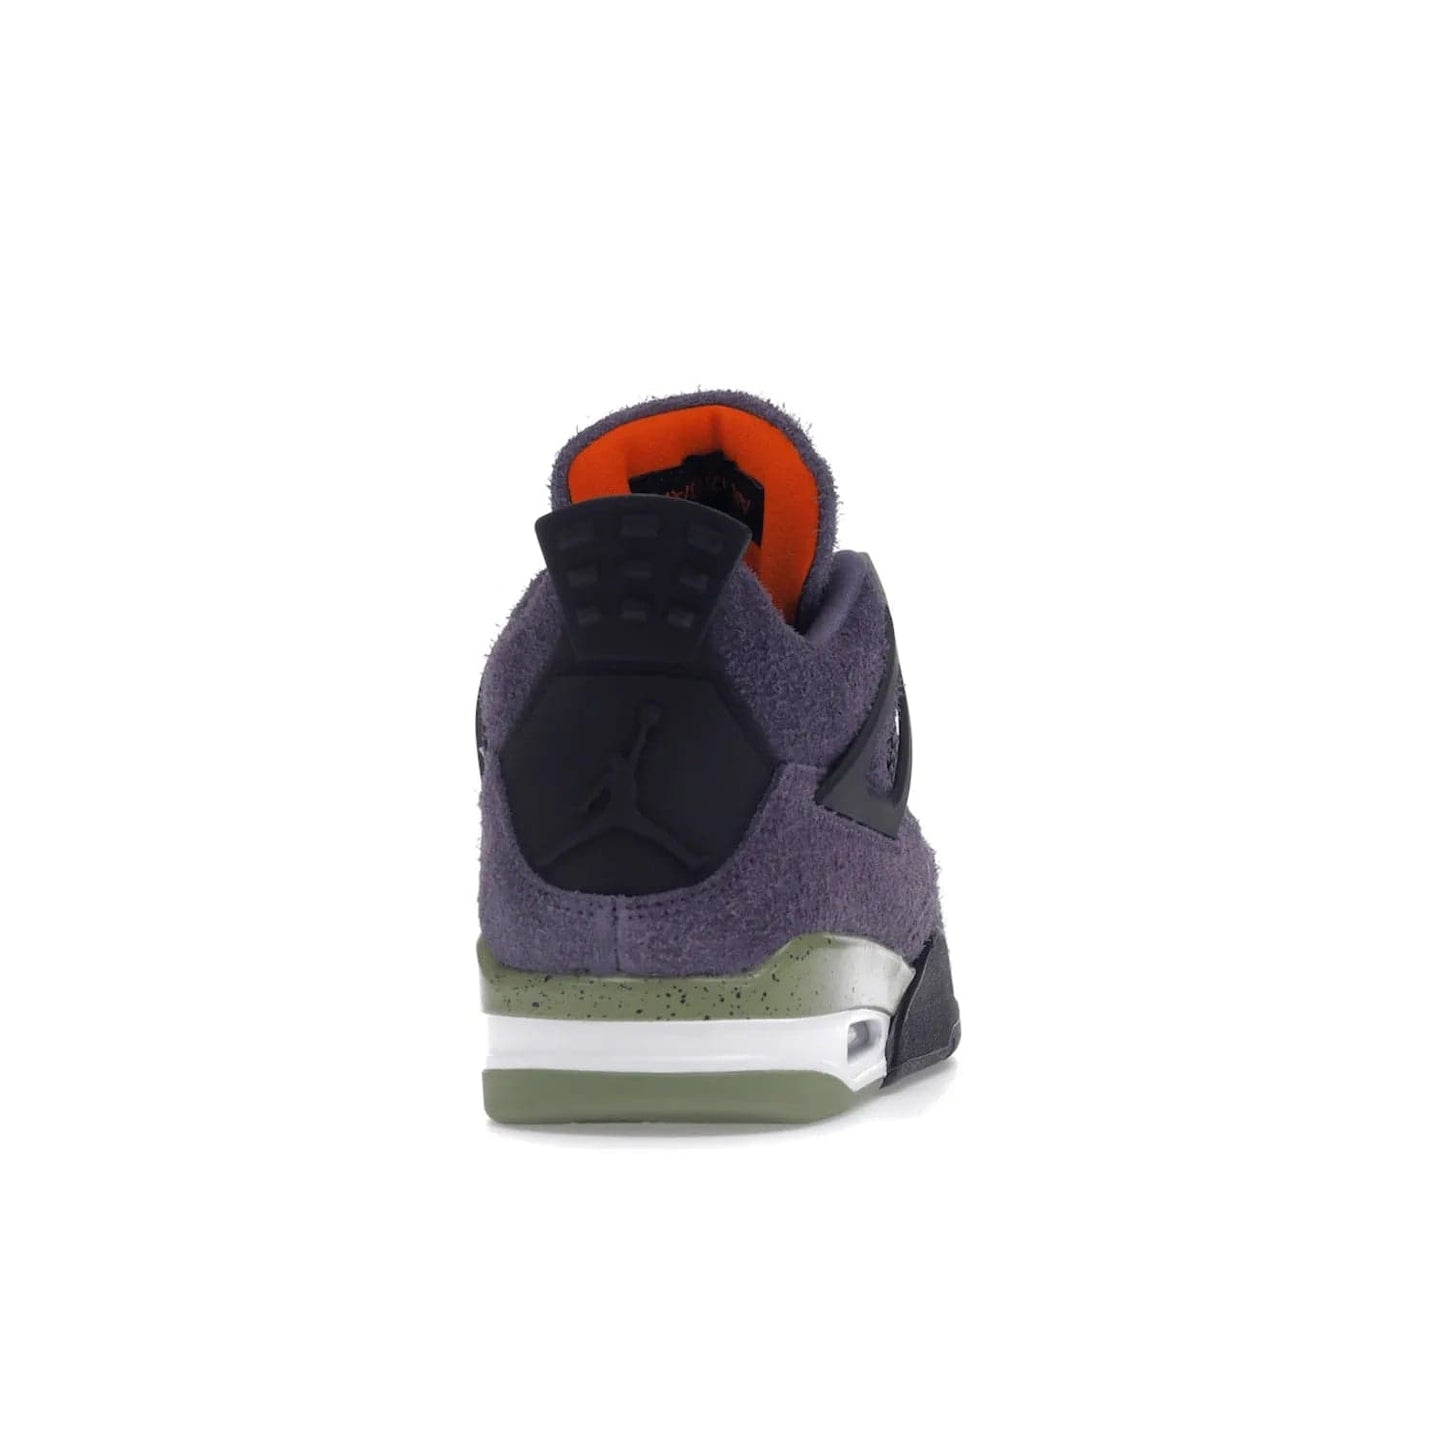 Jordan 4 Retro Canyon Purple (Women's) - Image 29 - Only at www.BallersClubKickz.com - New Air Jordan 4 Retro Canyon Purple W sneaker features shaggy purple suede, lime highlights & safety orange Jumpman branding. Classic ankle-hugging silhouette with modern colors released 15/10/2022.